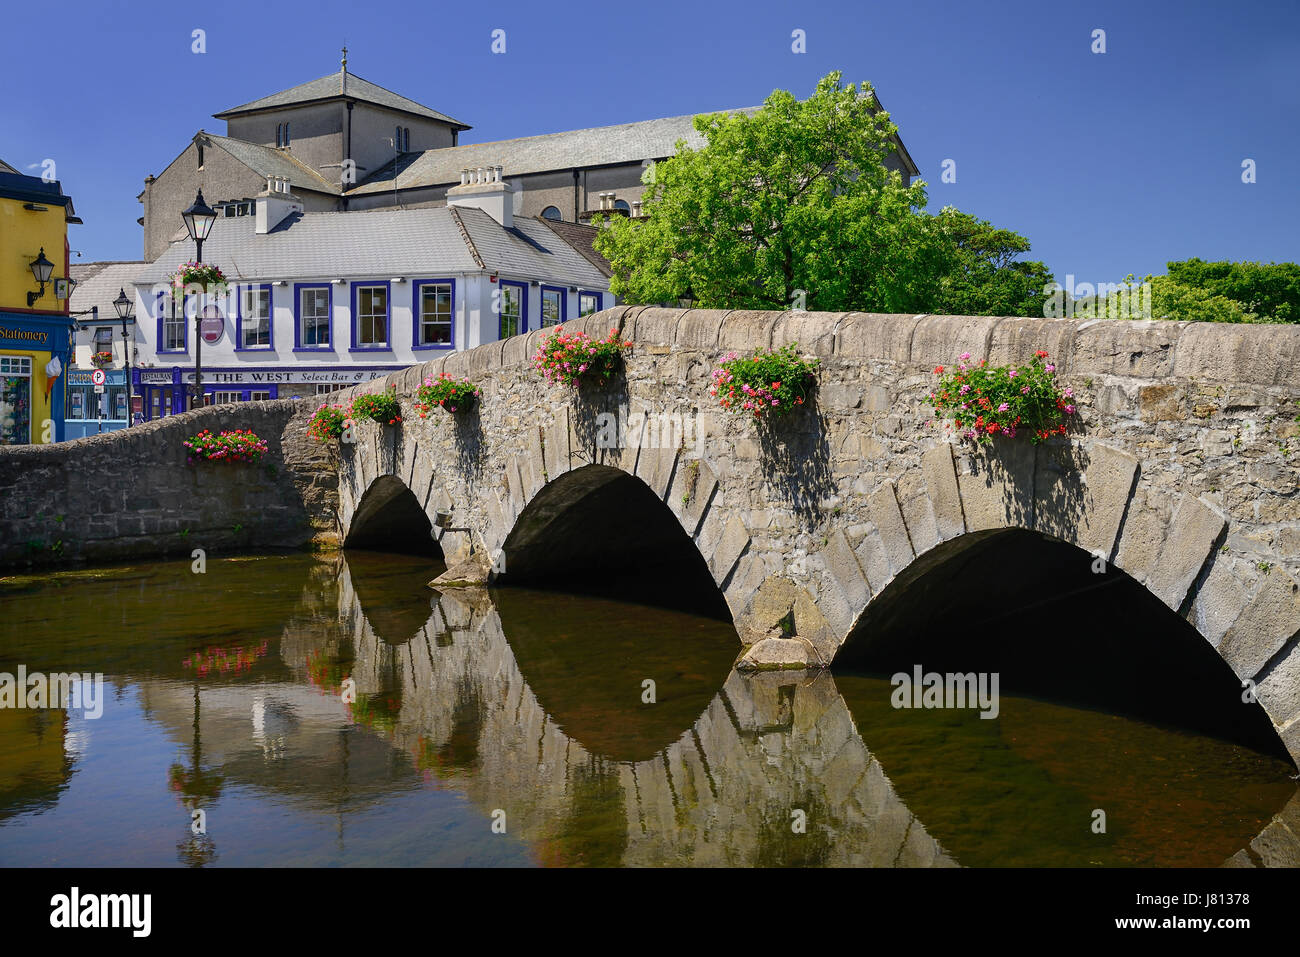 Ireland, County Mayo, Westport, A bridge over the Carrowbeg River on the Mall. Stock Photo